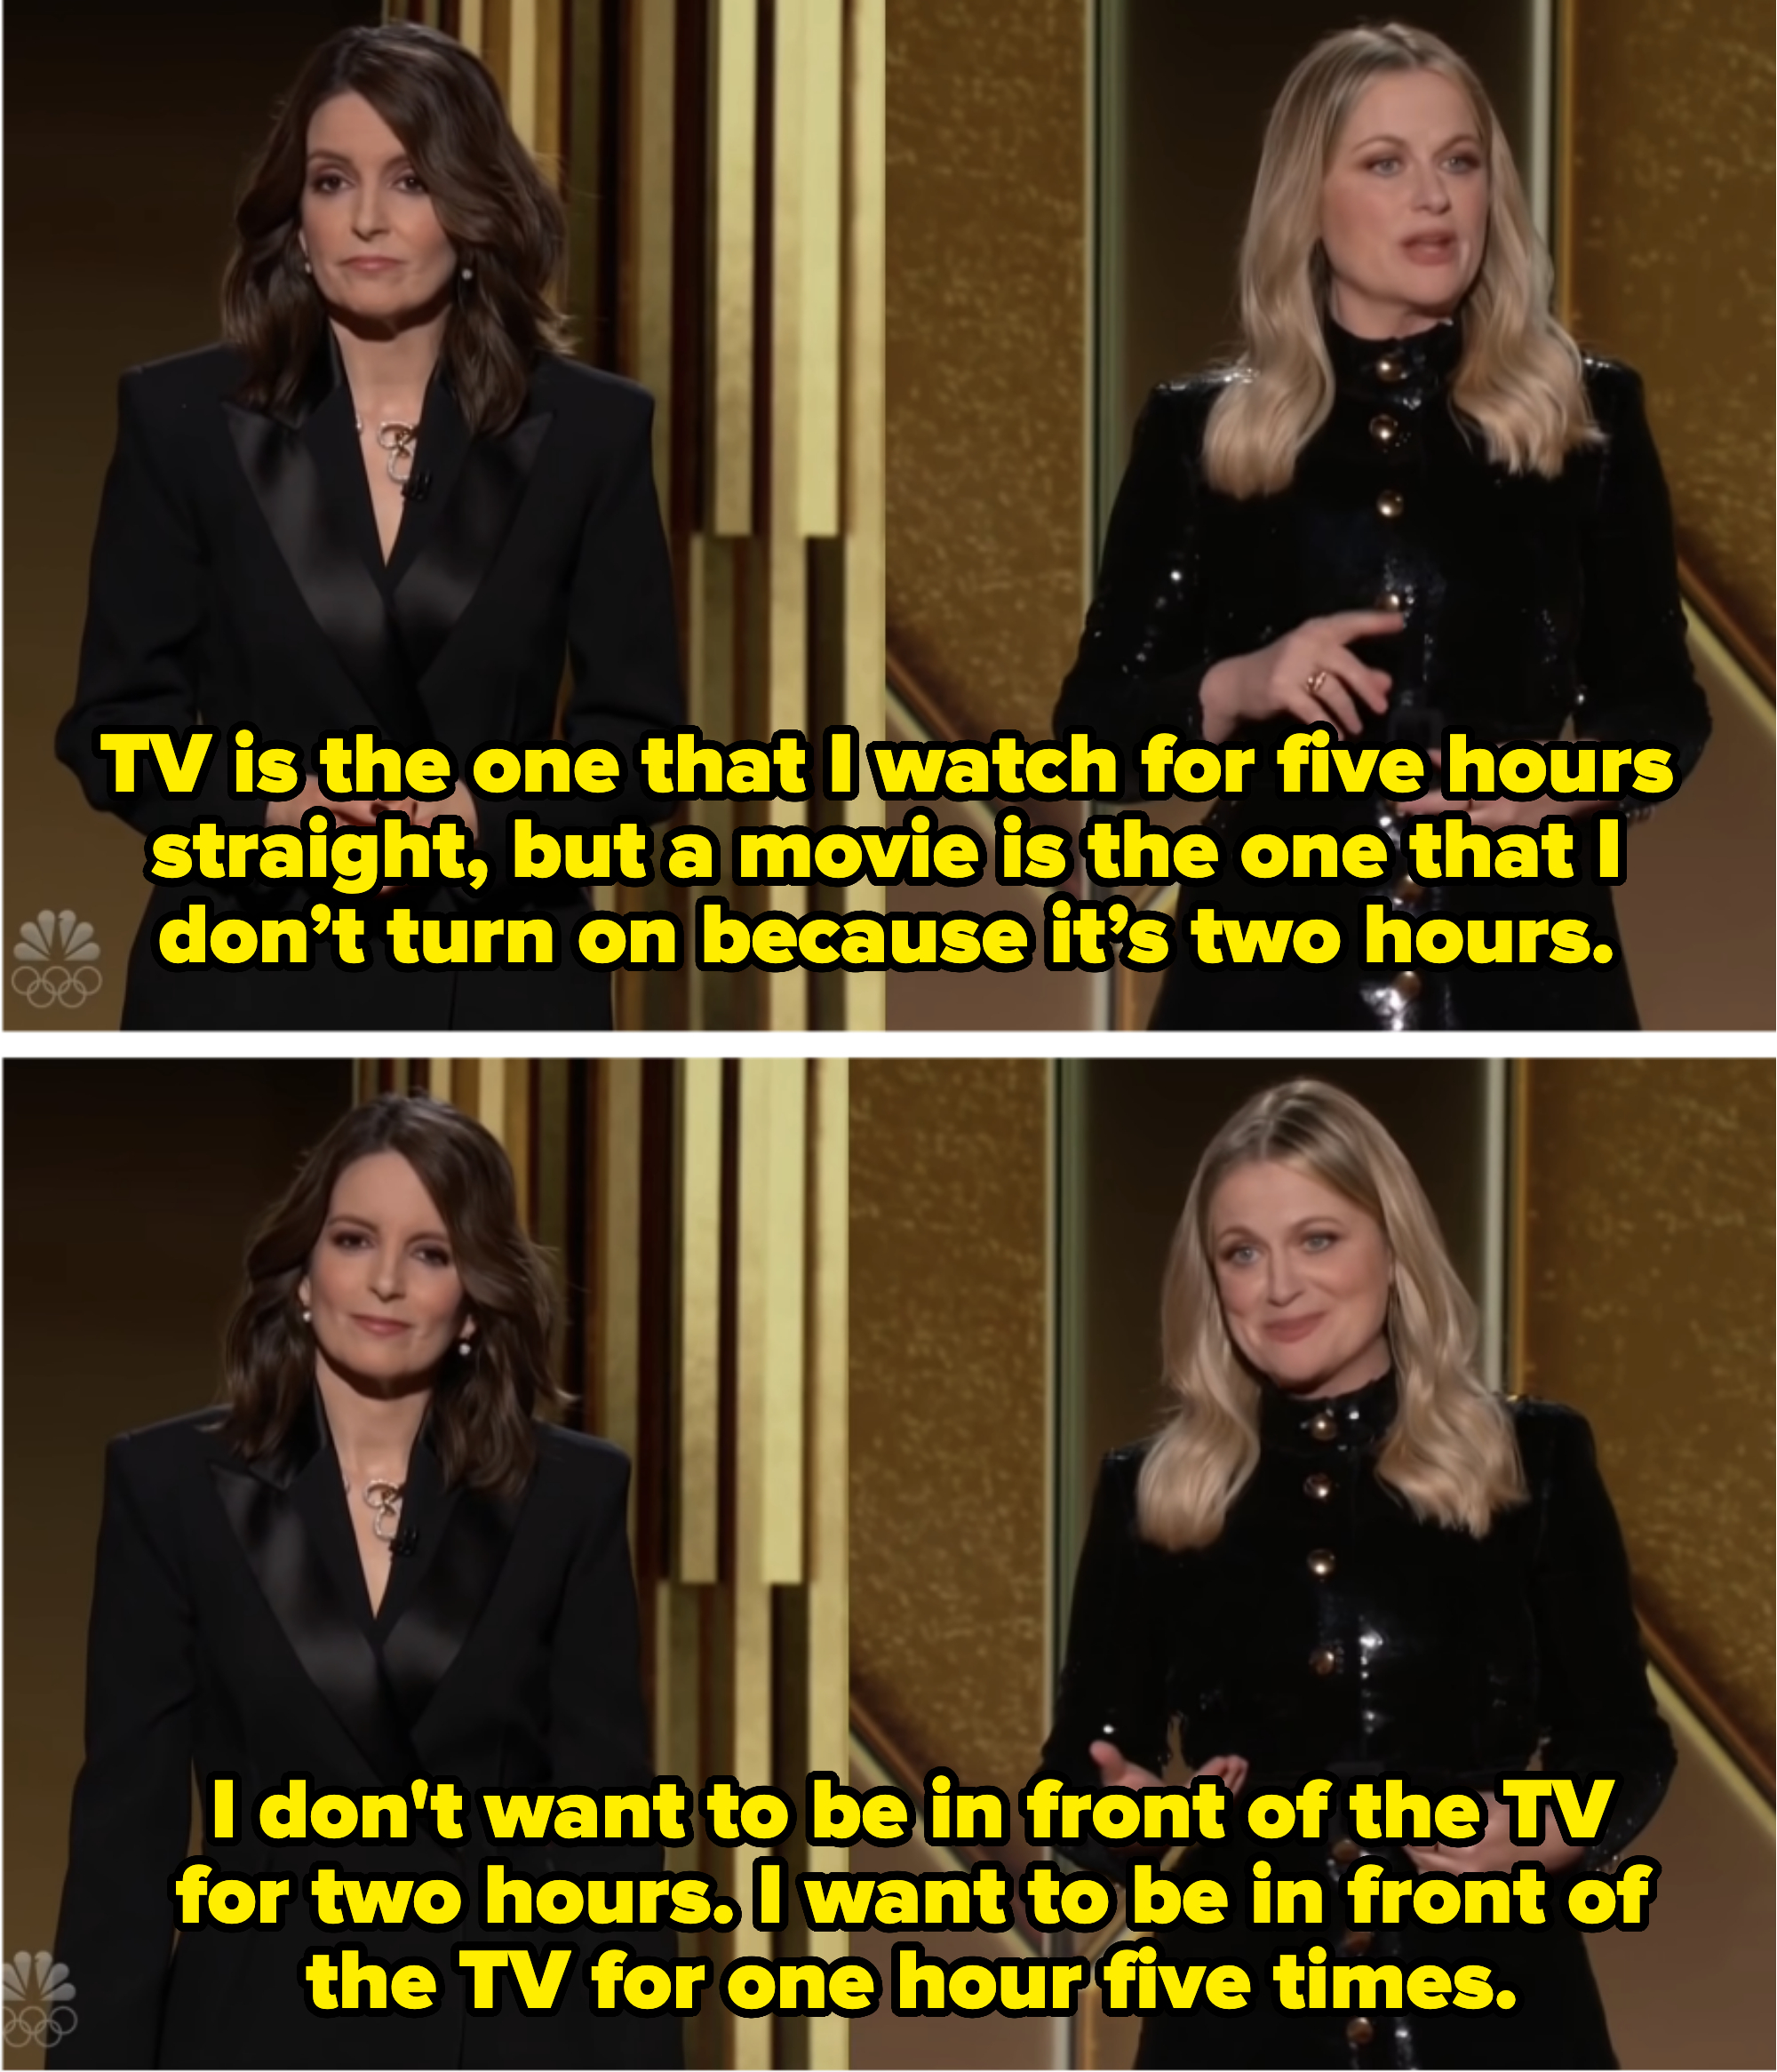 Tina Fey and Amy Poehler onstage